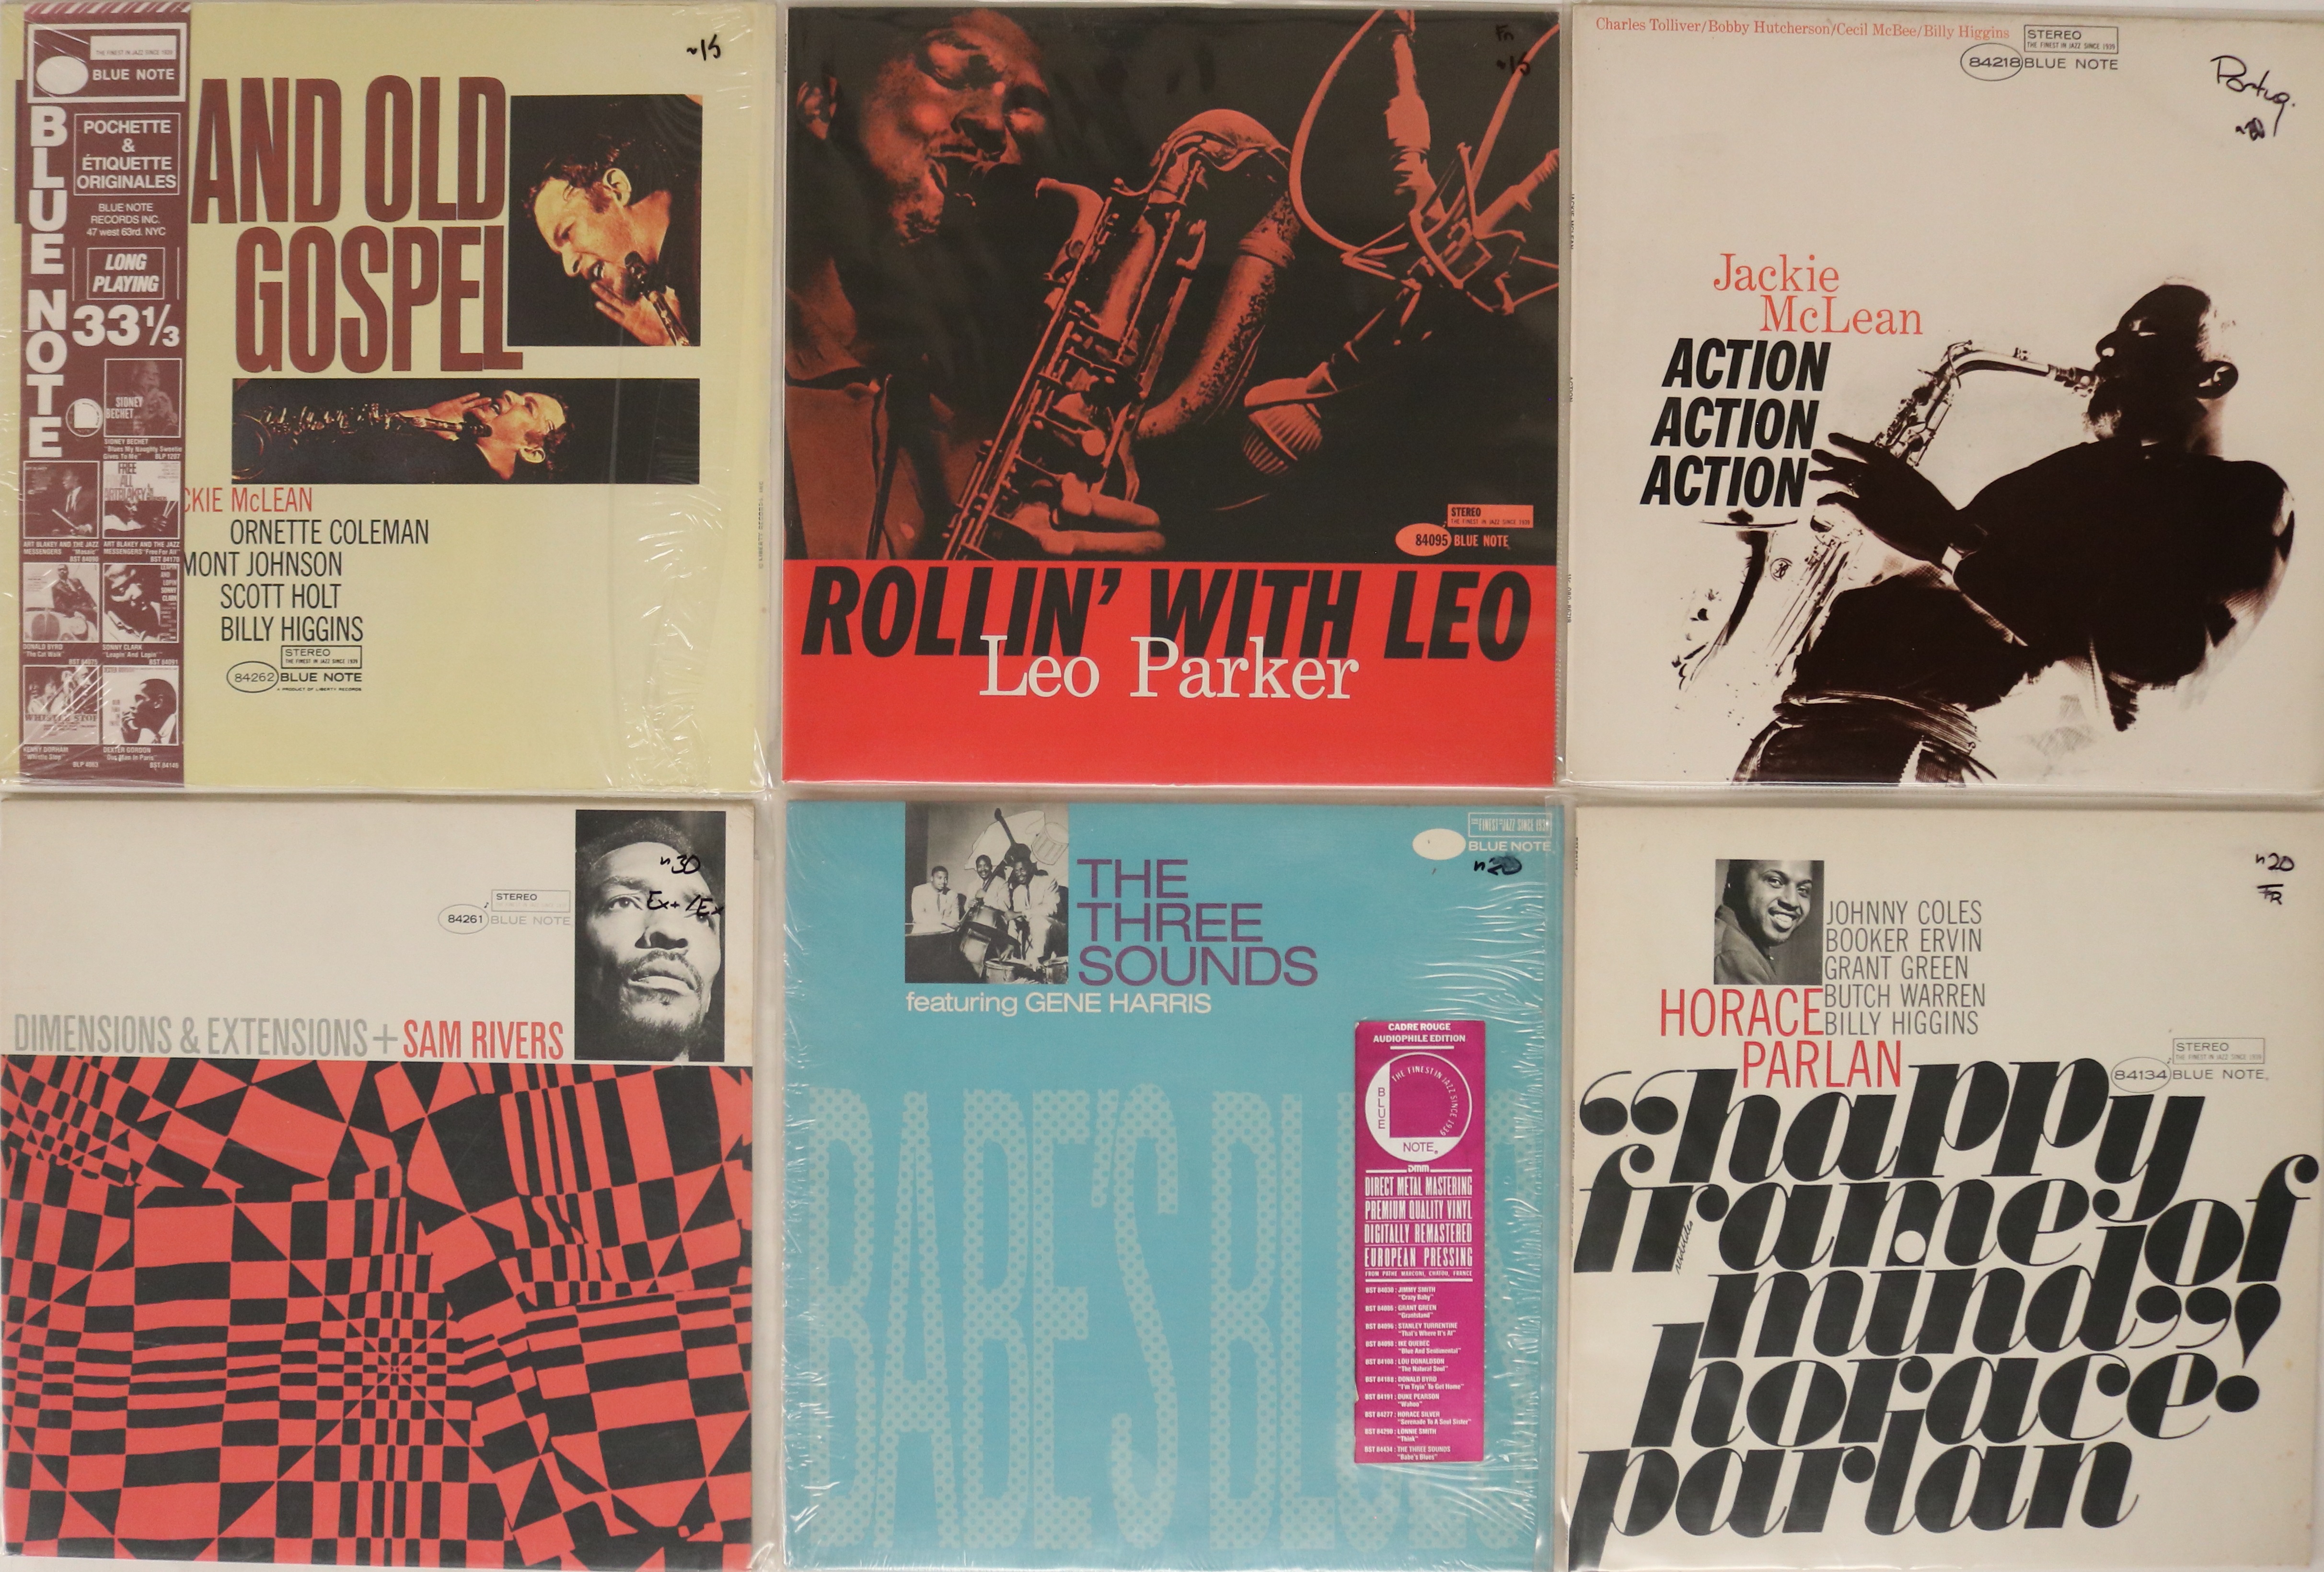 BLUE NOTE AUDIOPHILE COLLECTION - EU & UK LPs. High quality collection of 16 x LPs.